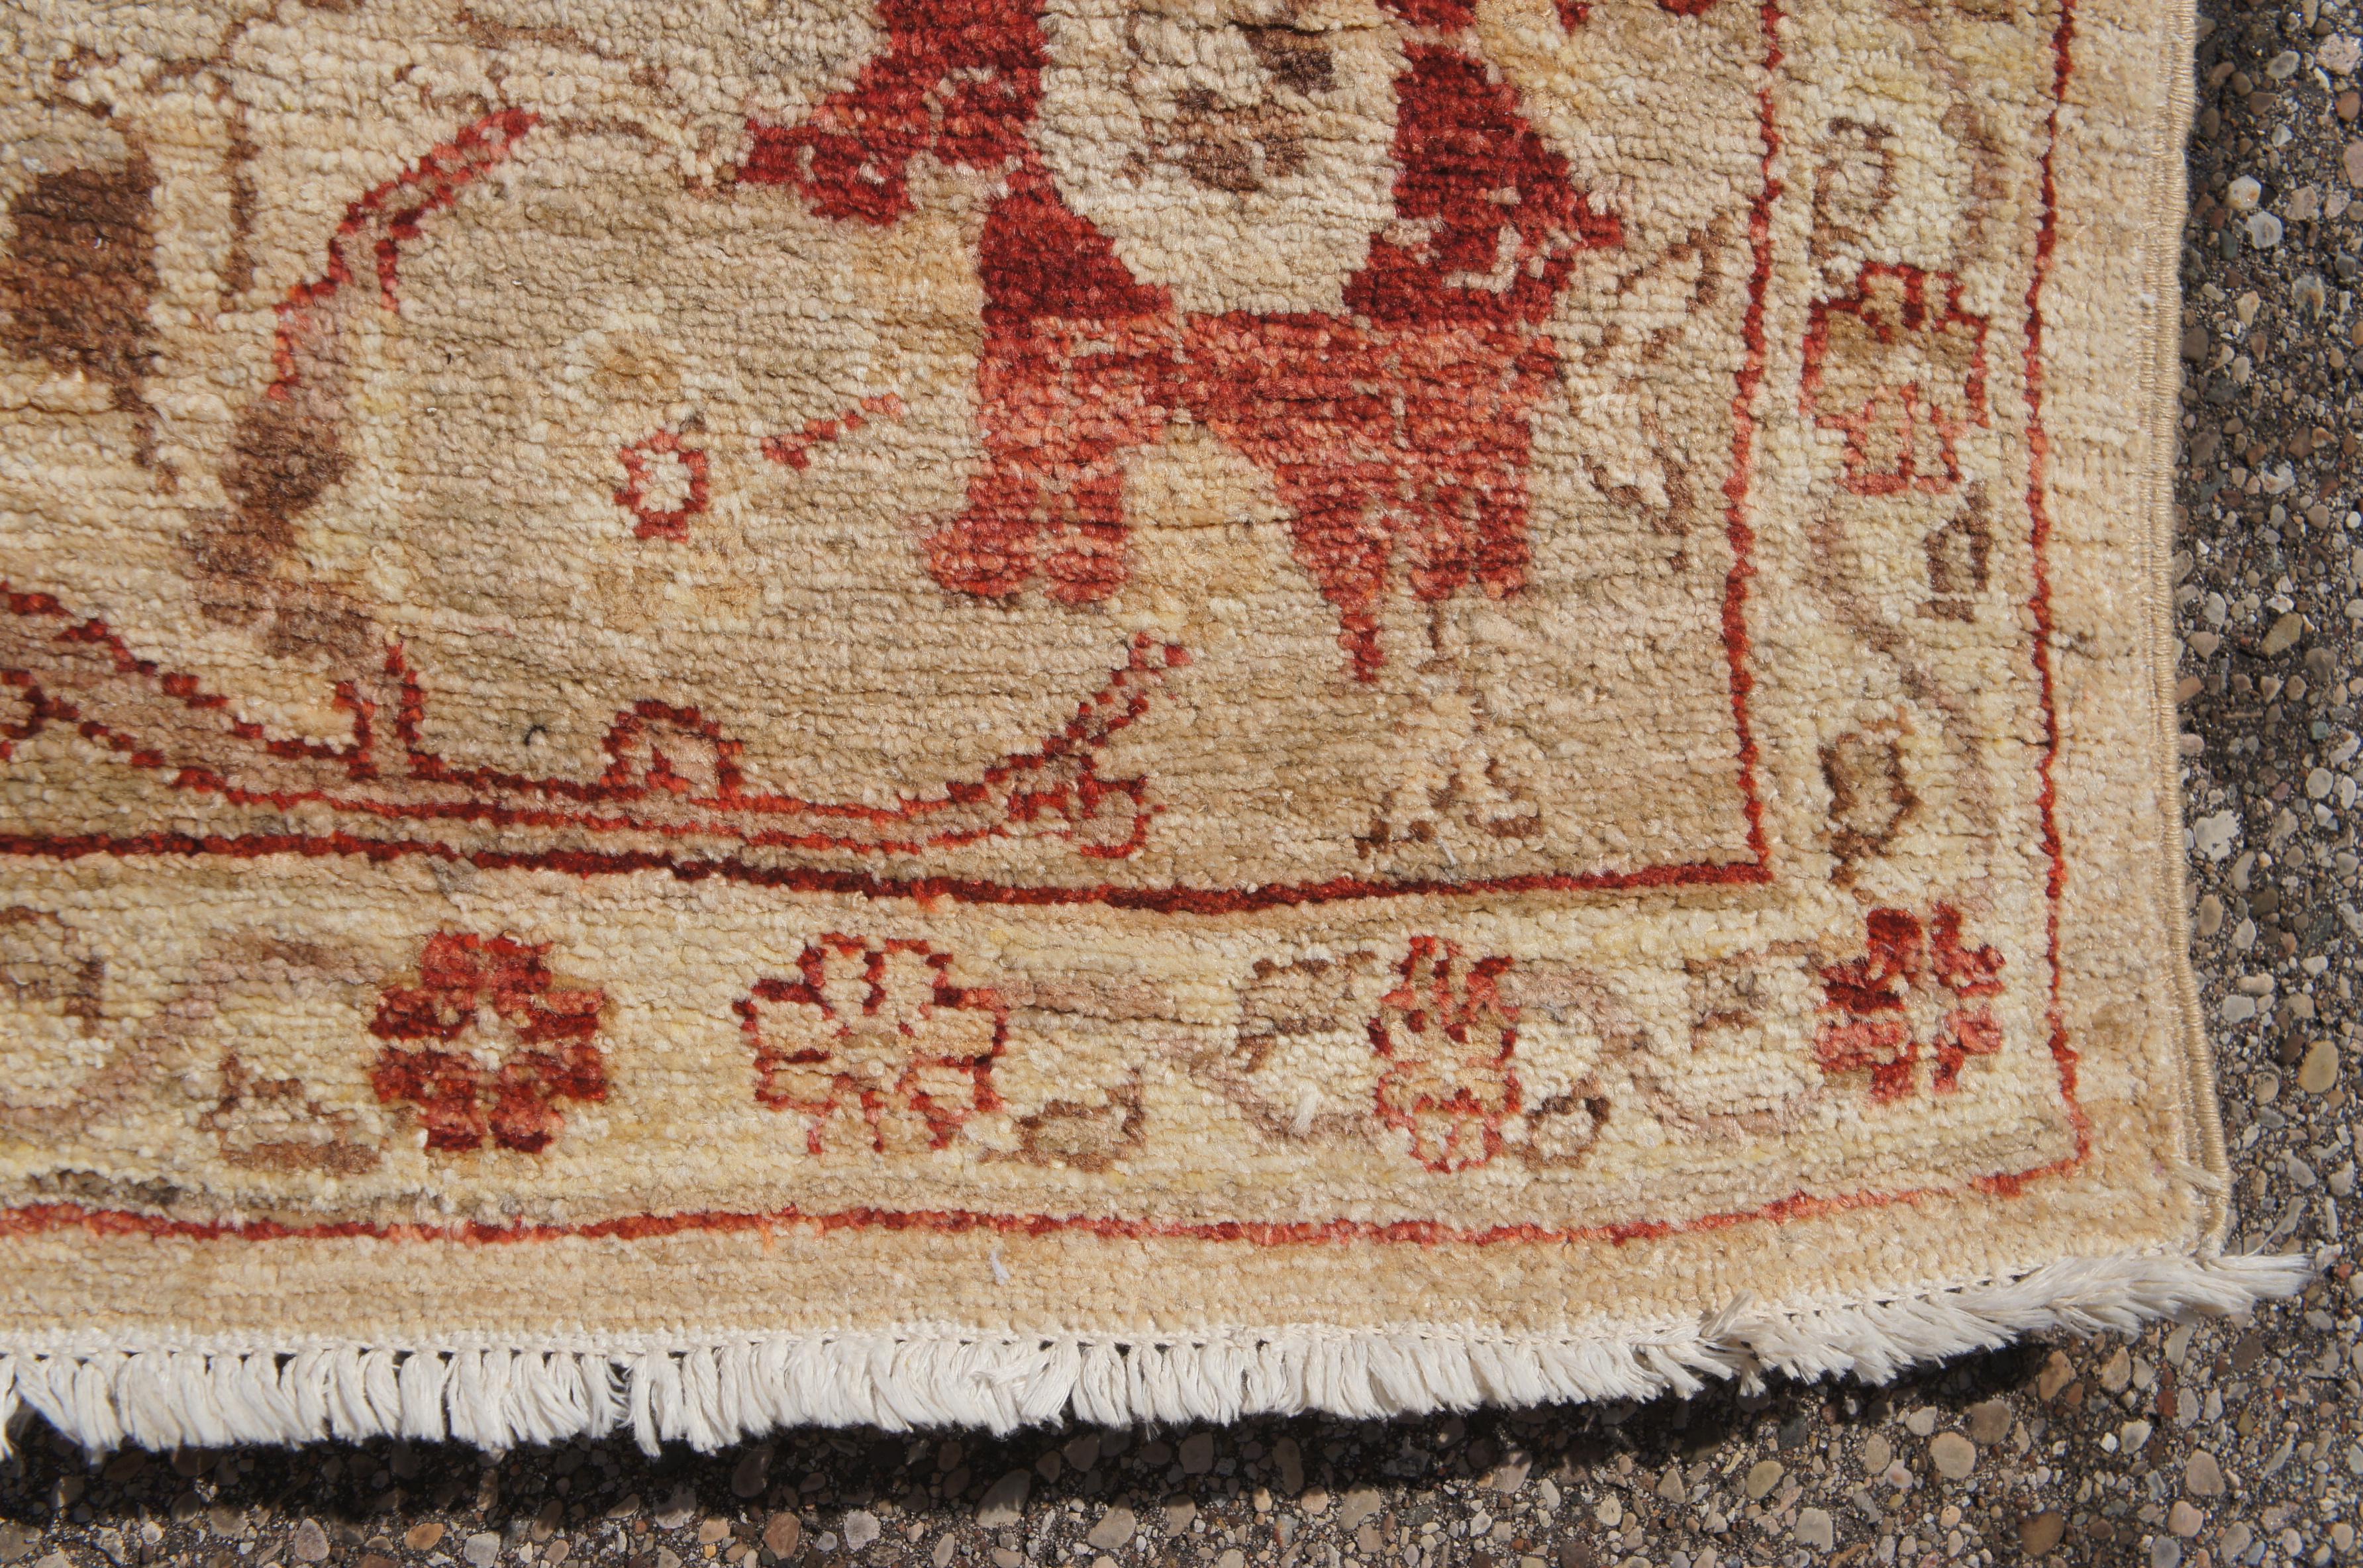 Hand Woven Pakistani Peshawar Red & Beige Floral Carpet Wool Area Rug 8' x 10' For Sale 6